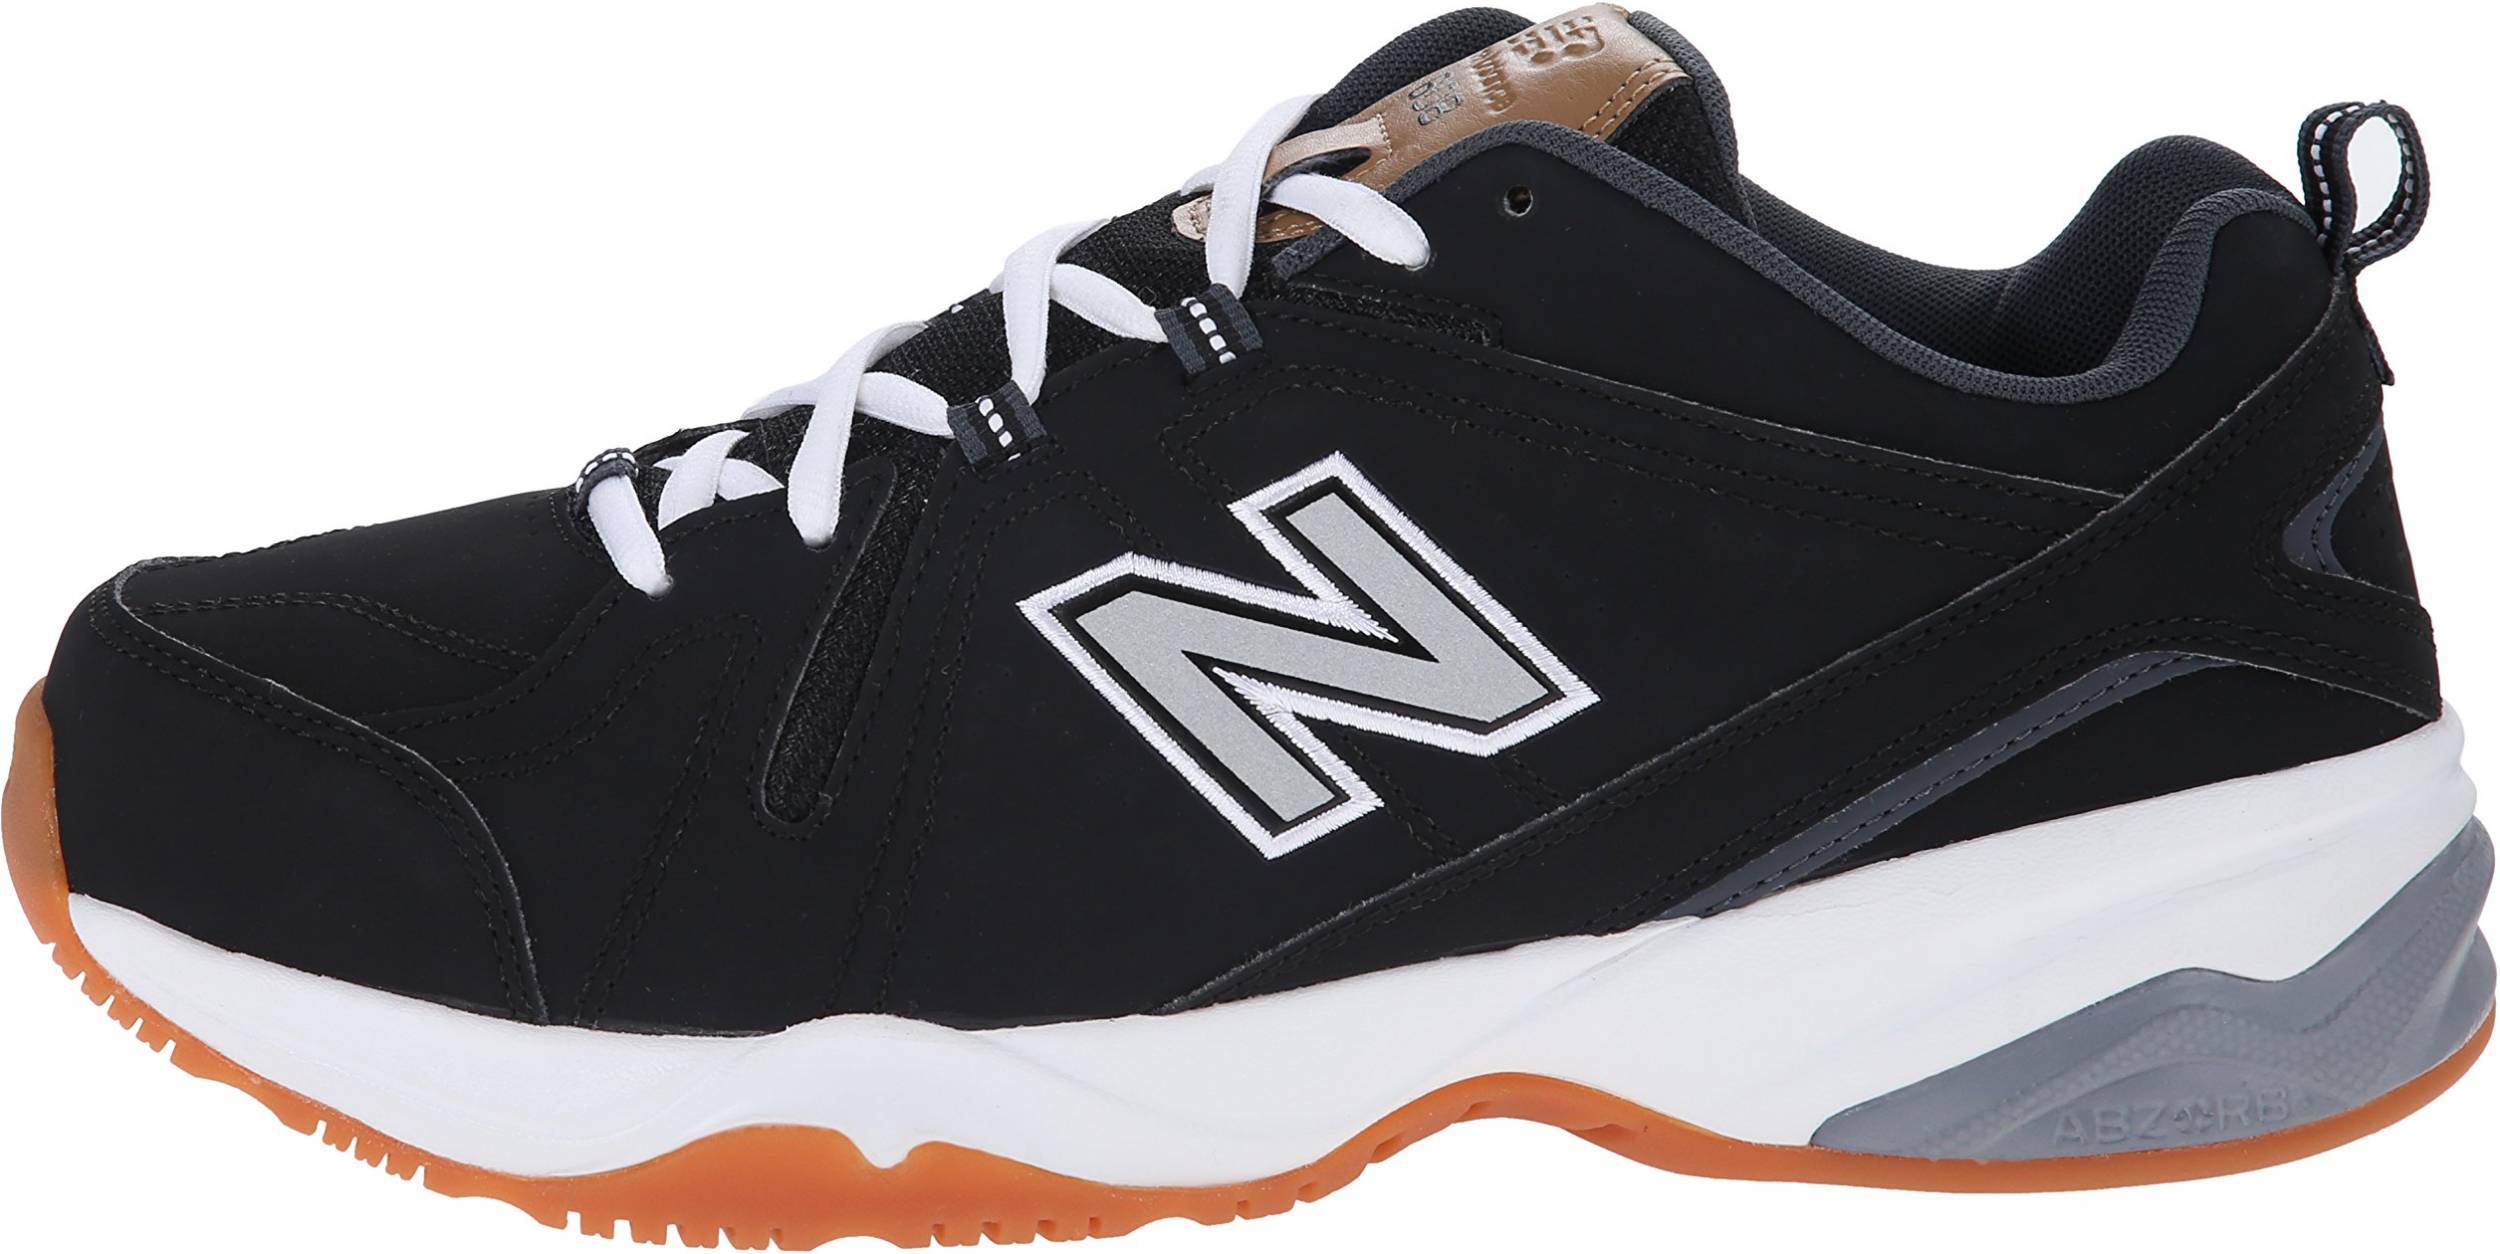 New Balance 608 v4 Review Facts, |